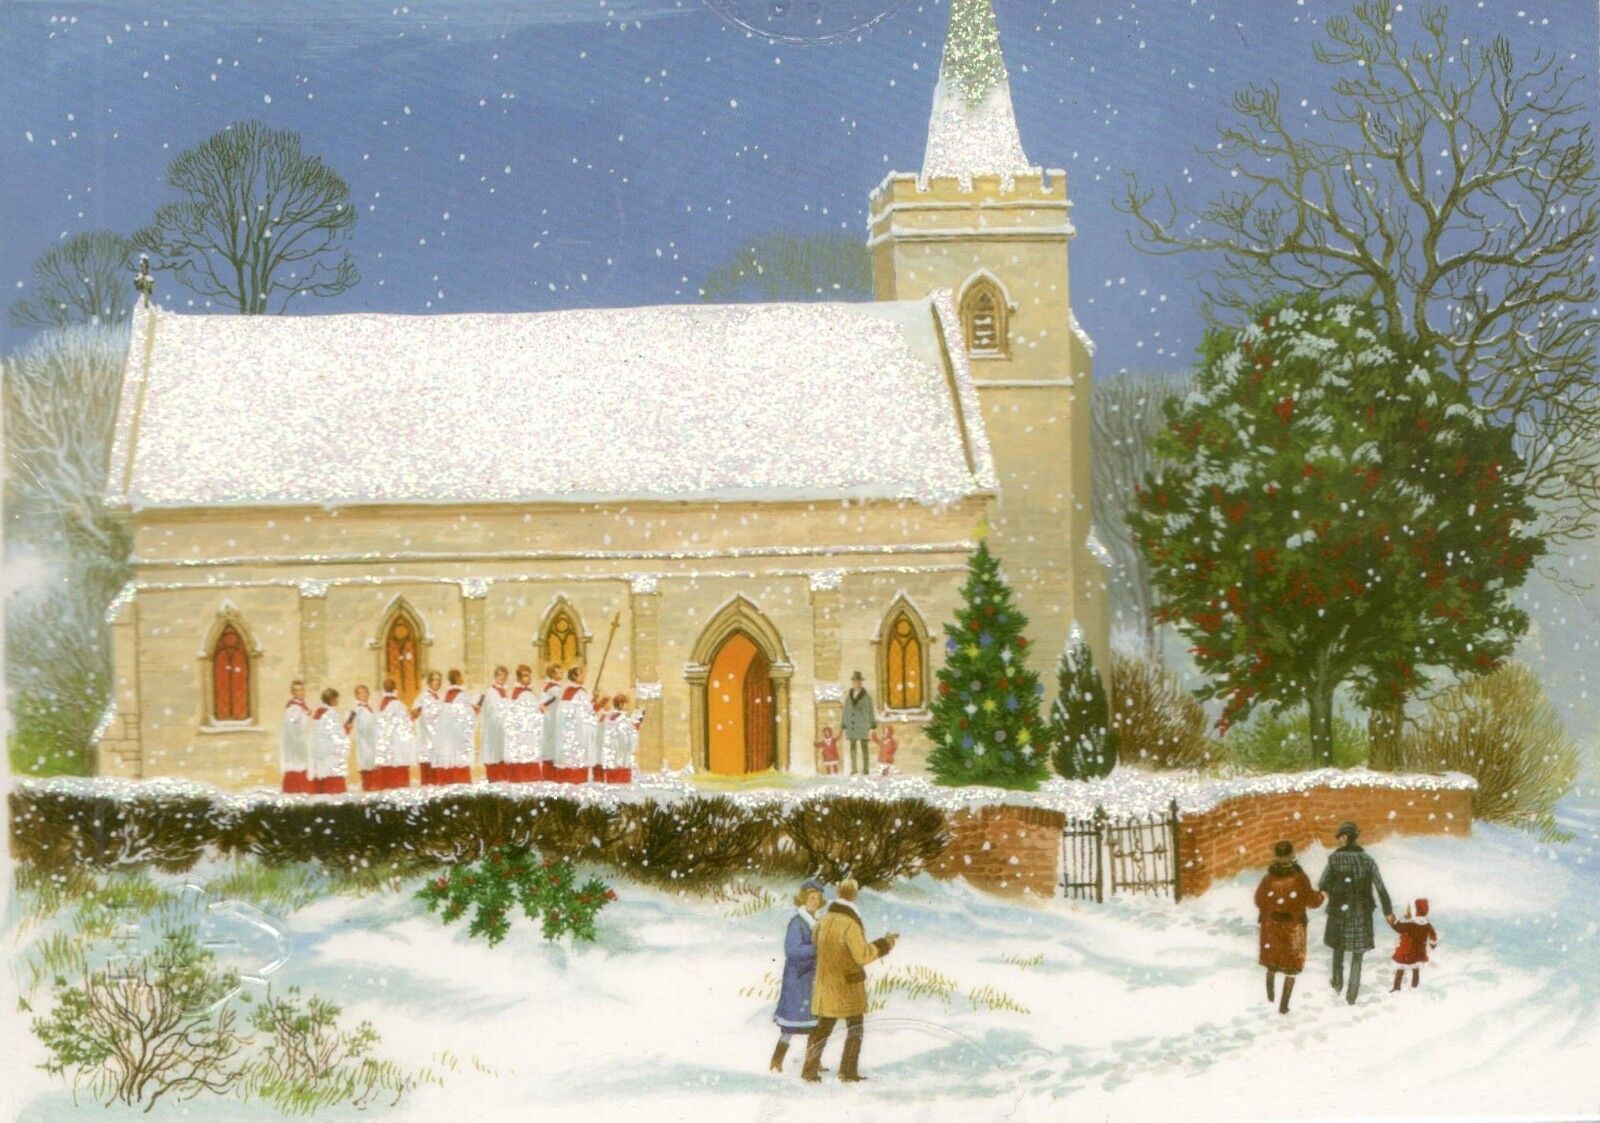 16 ct CHRISTMAS CARDS & ENVELOPES SHOWS PEOPLE GOING TO CHURCH IN SNOW NEW INBOX